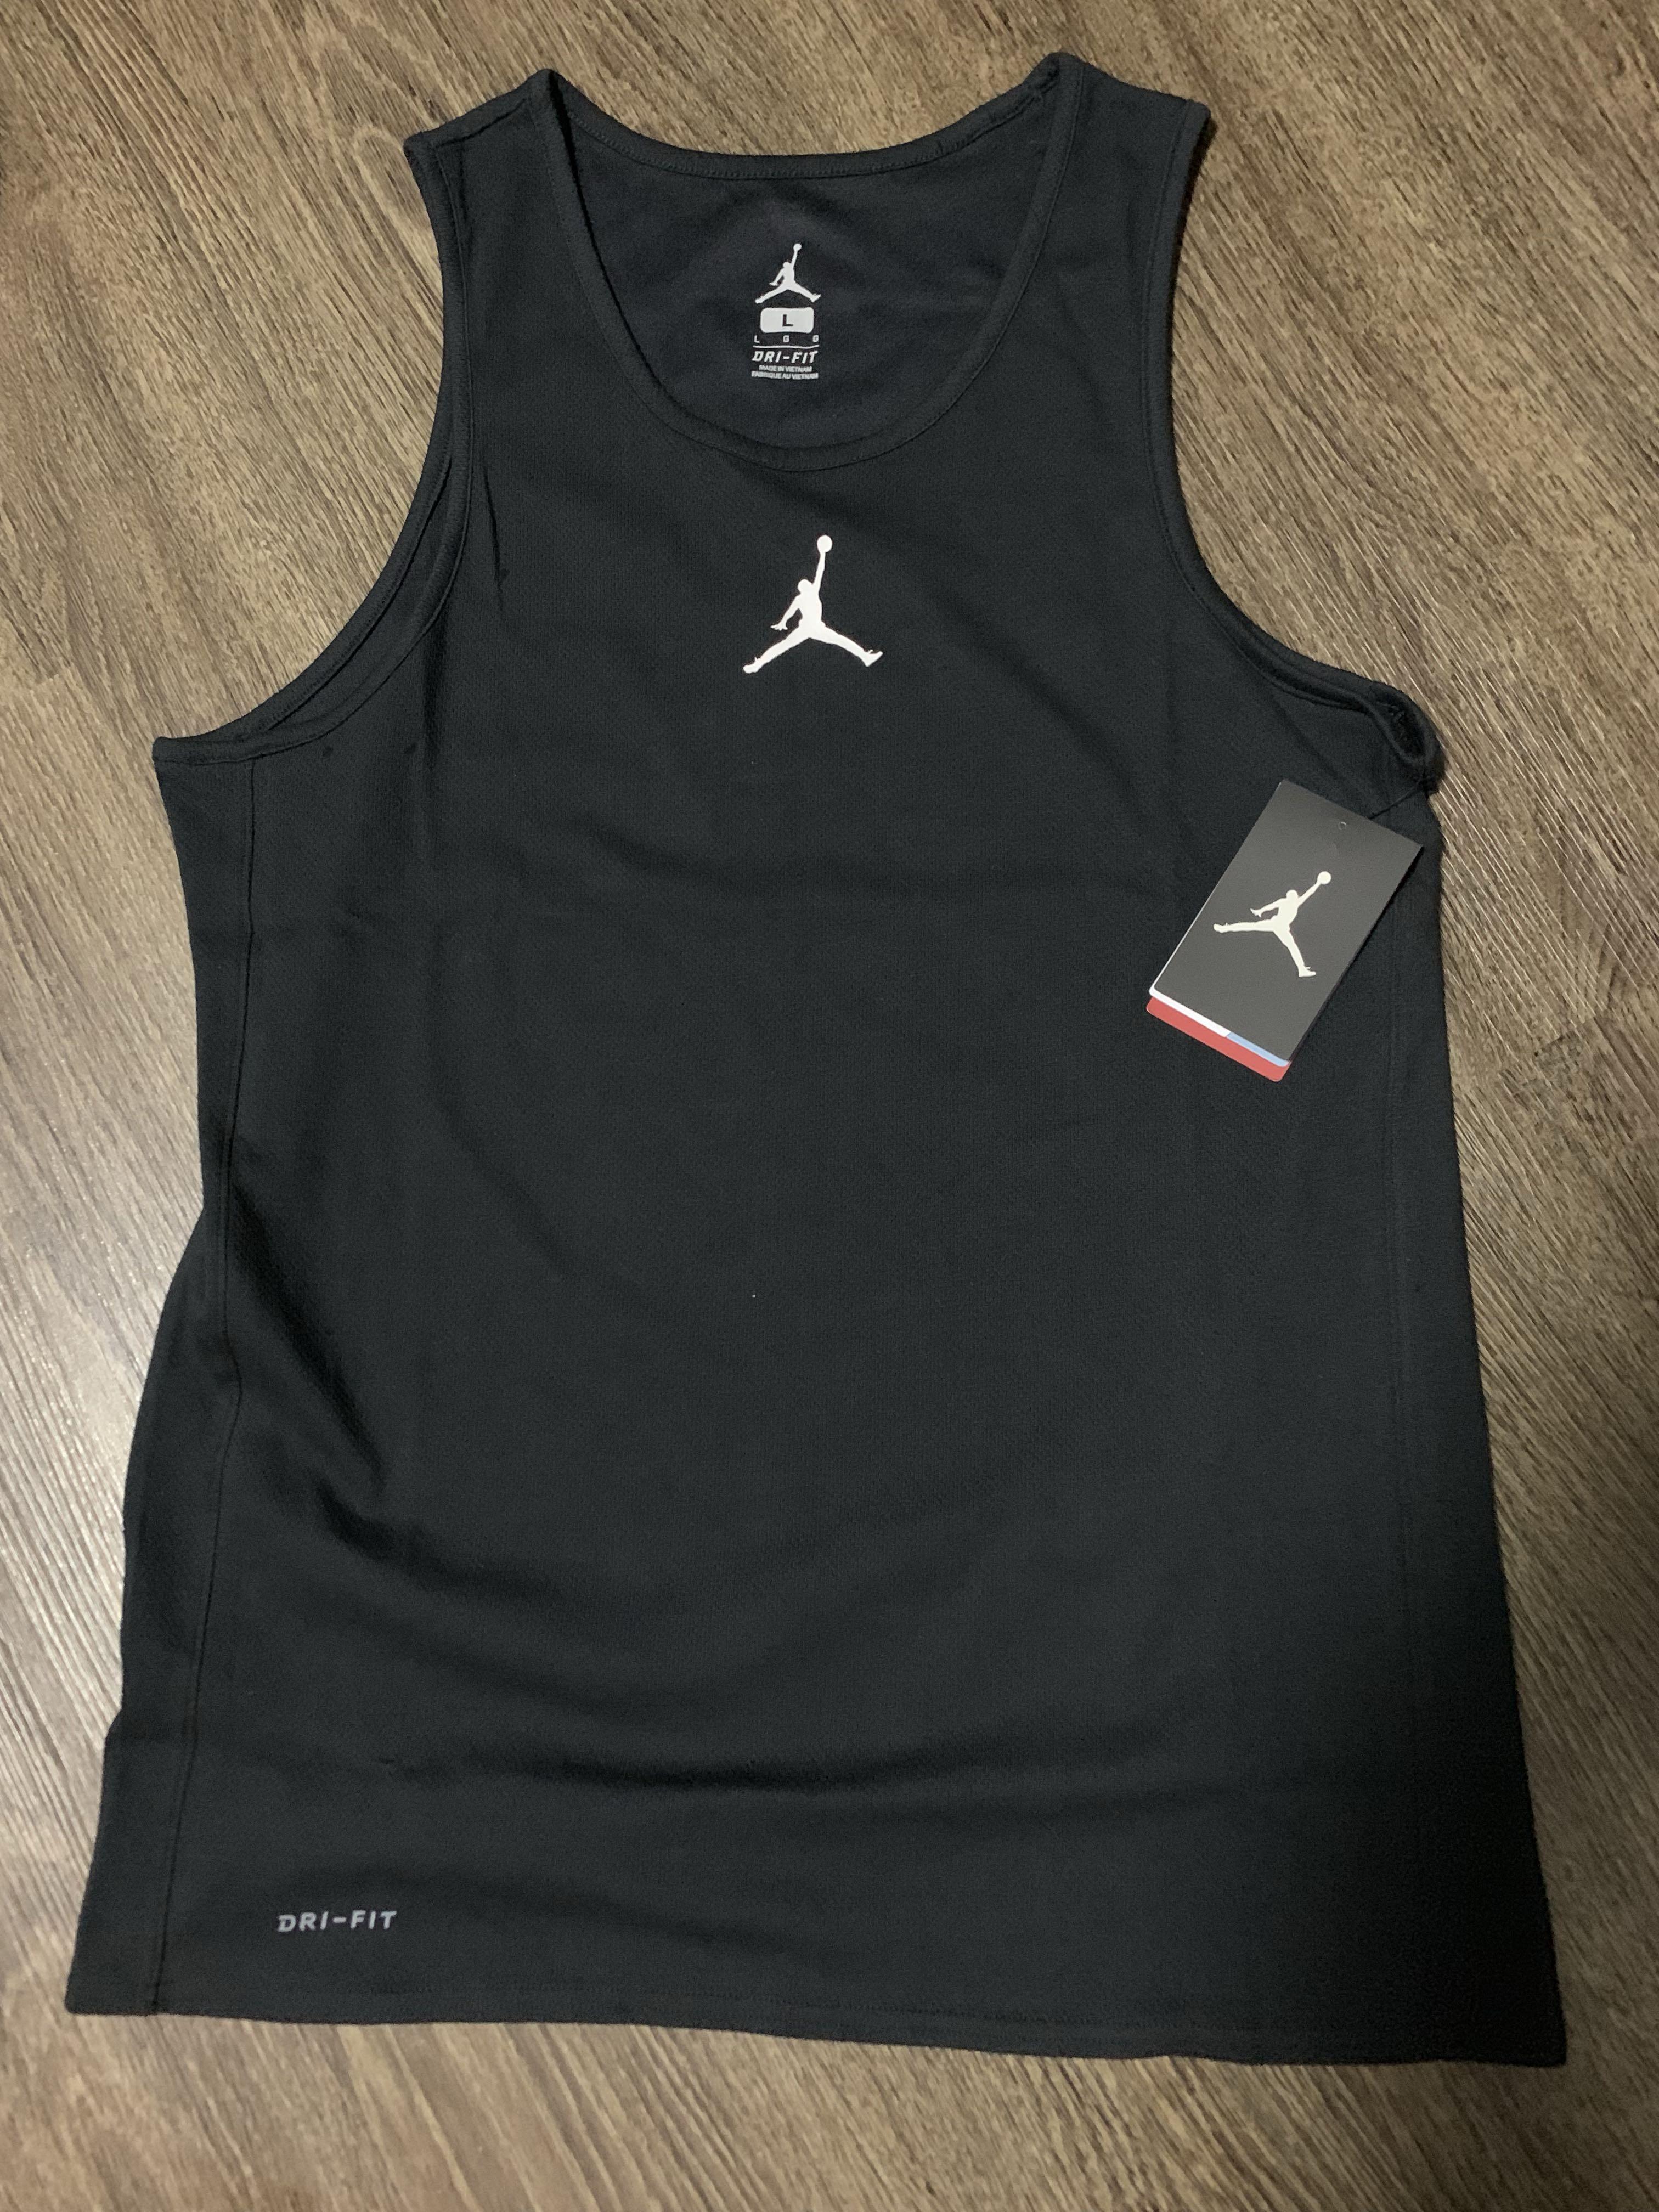 basketball tank L size new with tag 